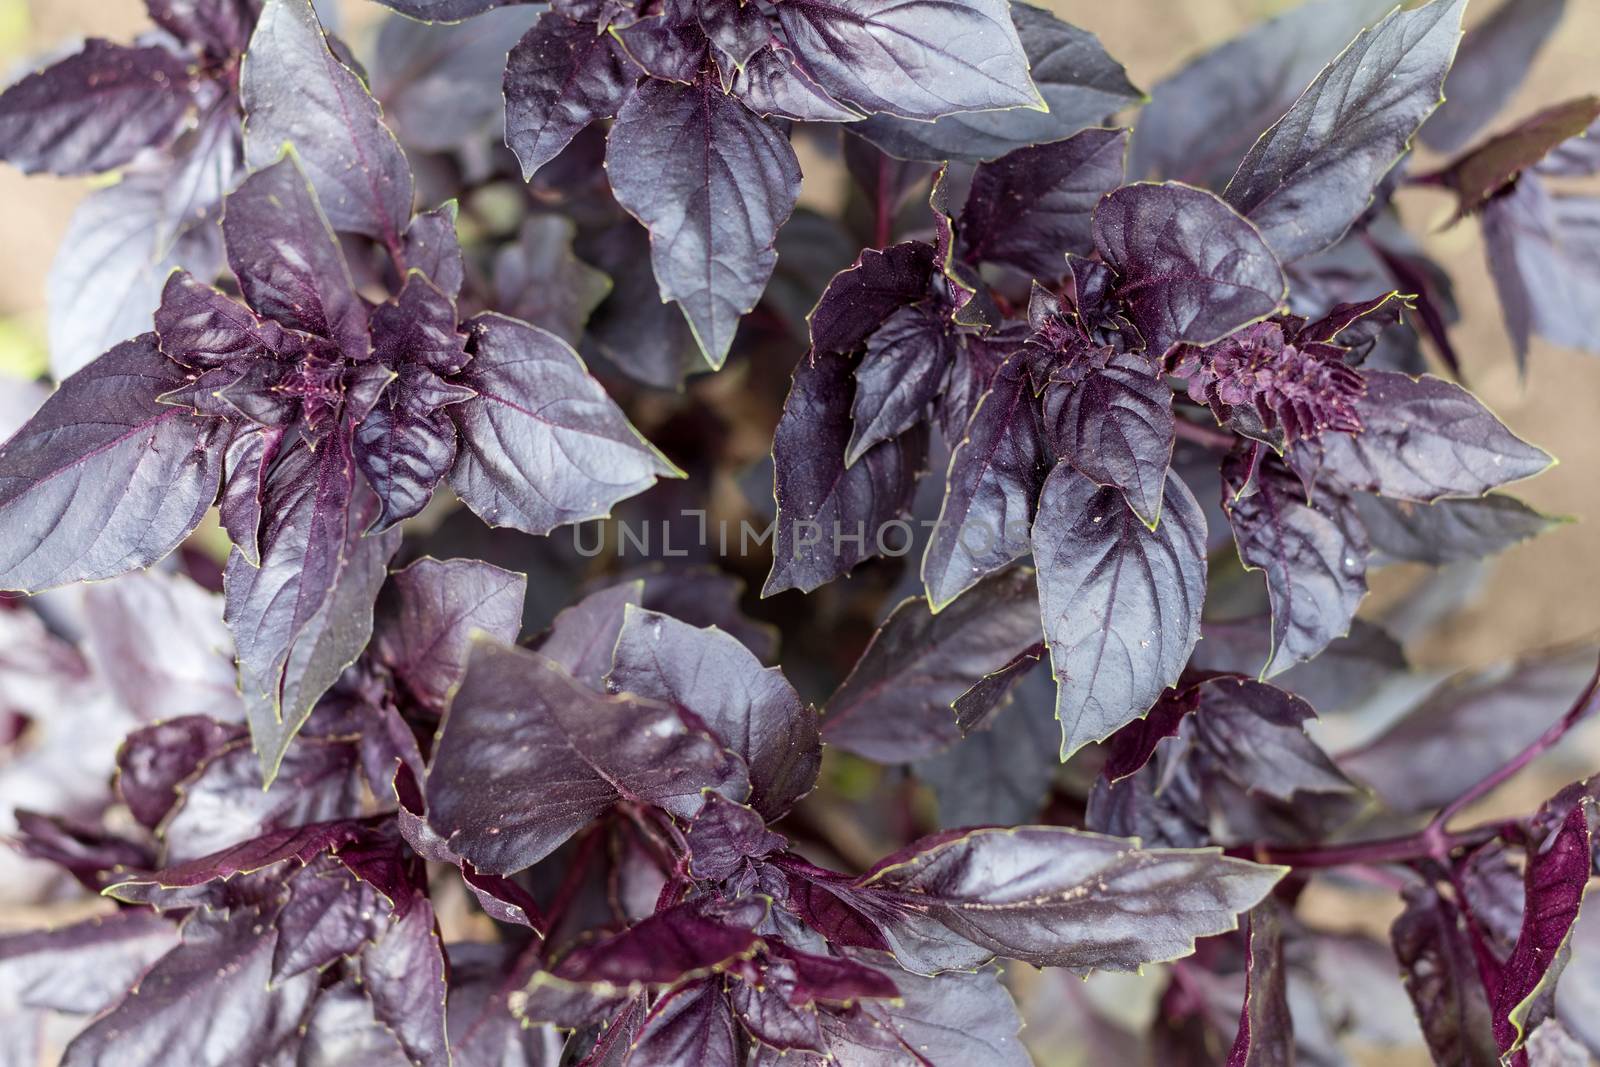 Bright purple basil in the garden. Top view